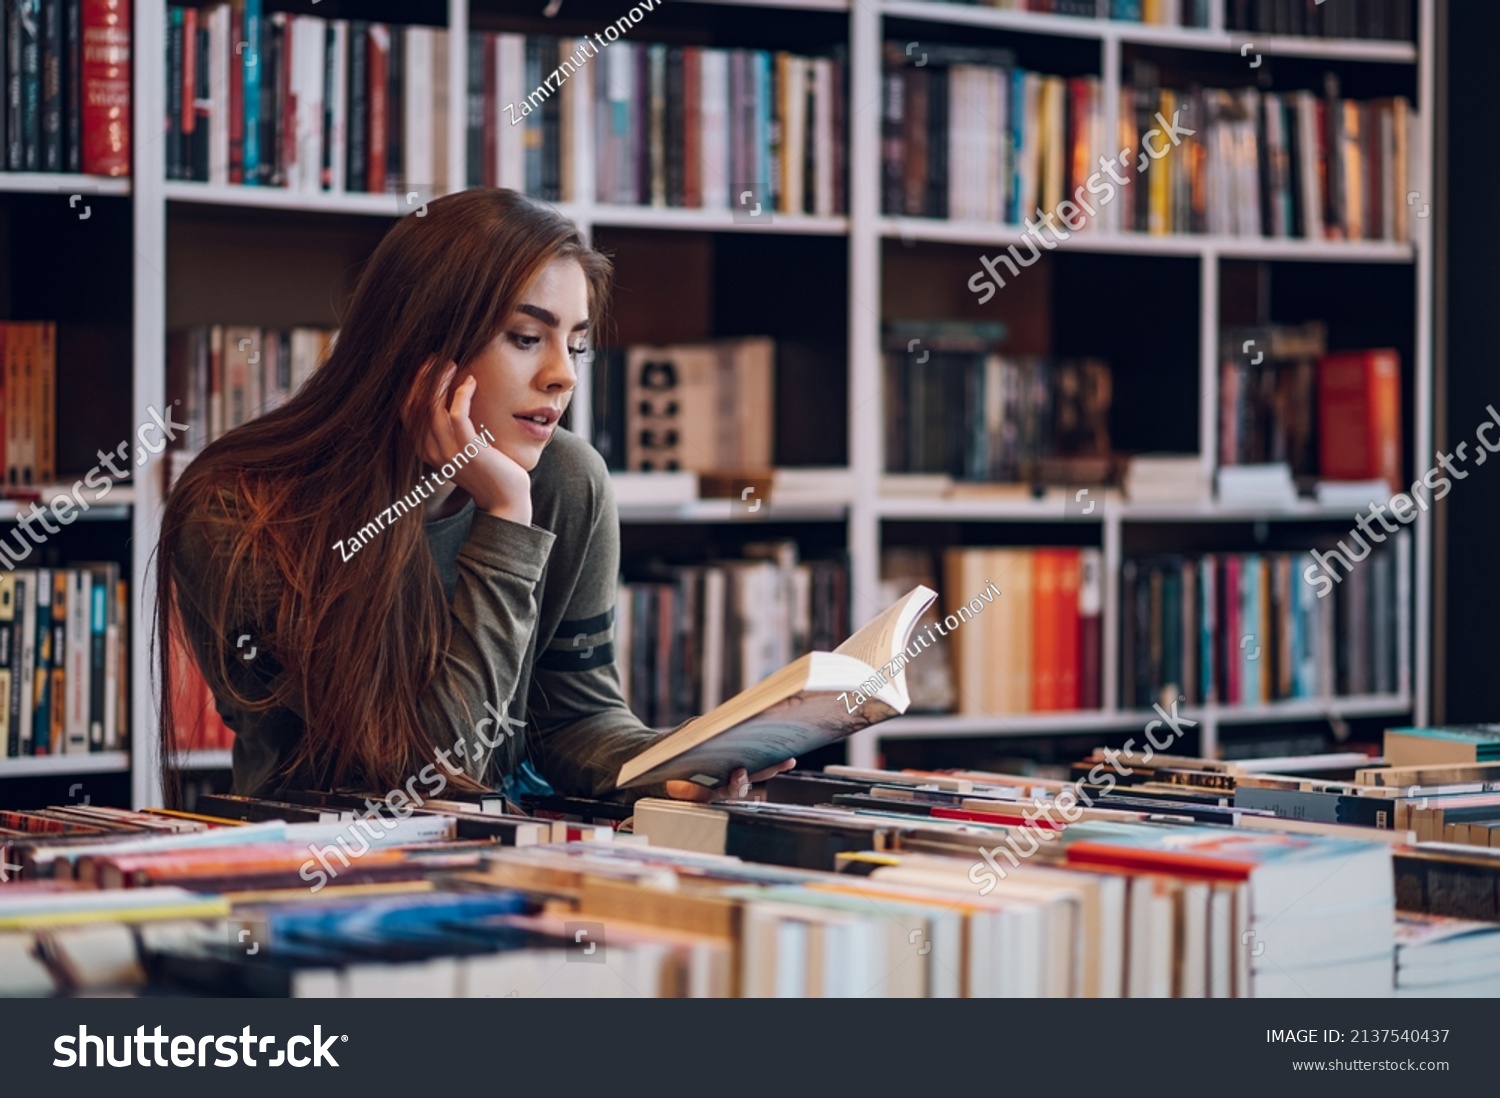 Beautiful young woman buying books at a bookstore and reading one. Geeky woman reading a book with a bookshelves in background. #2137540437